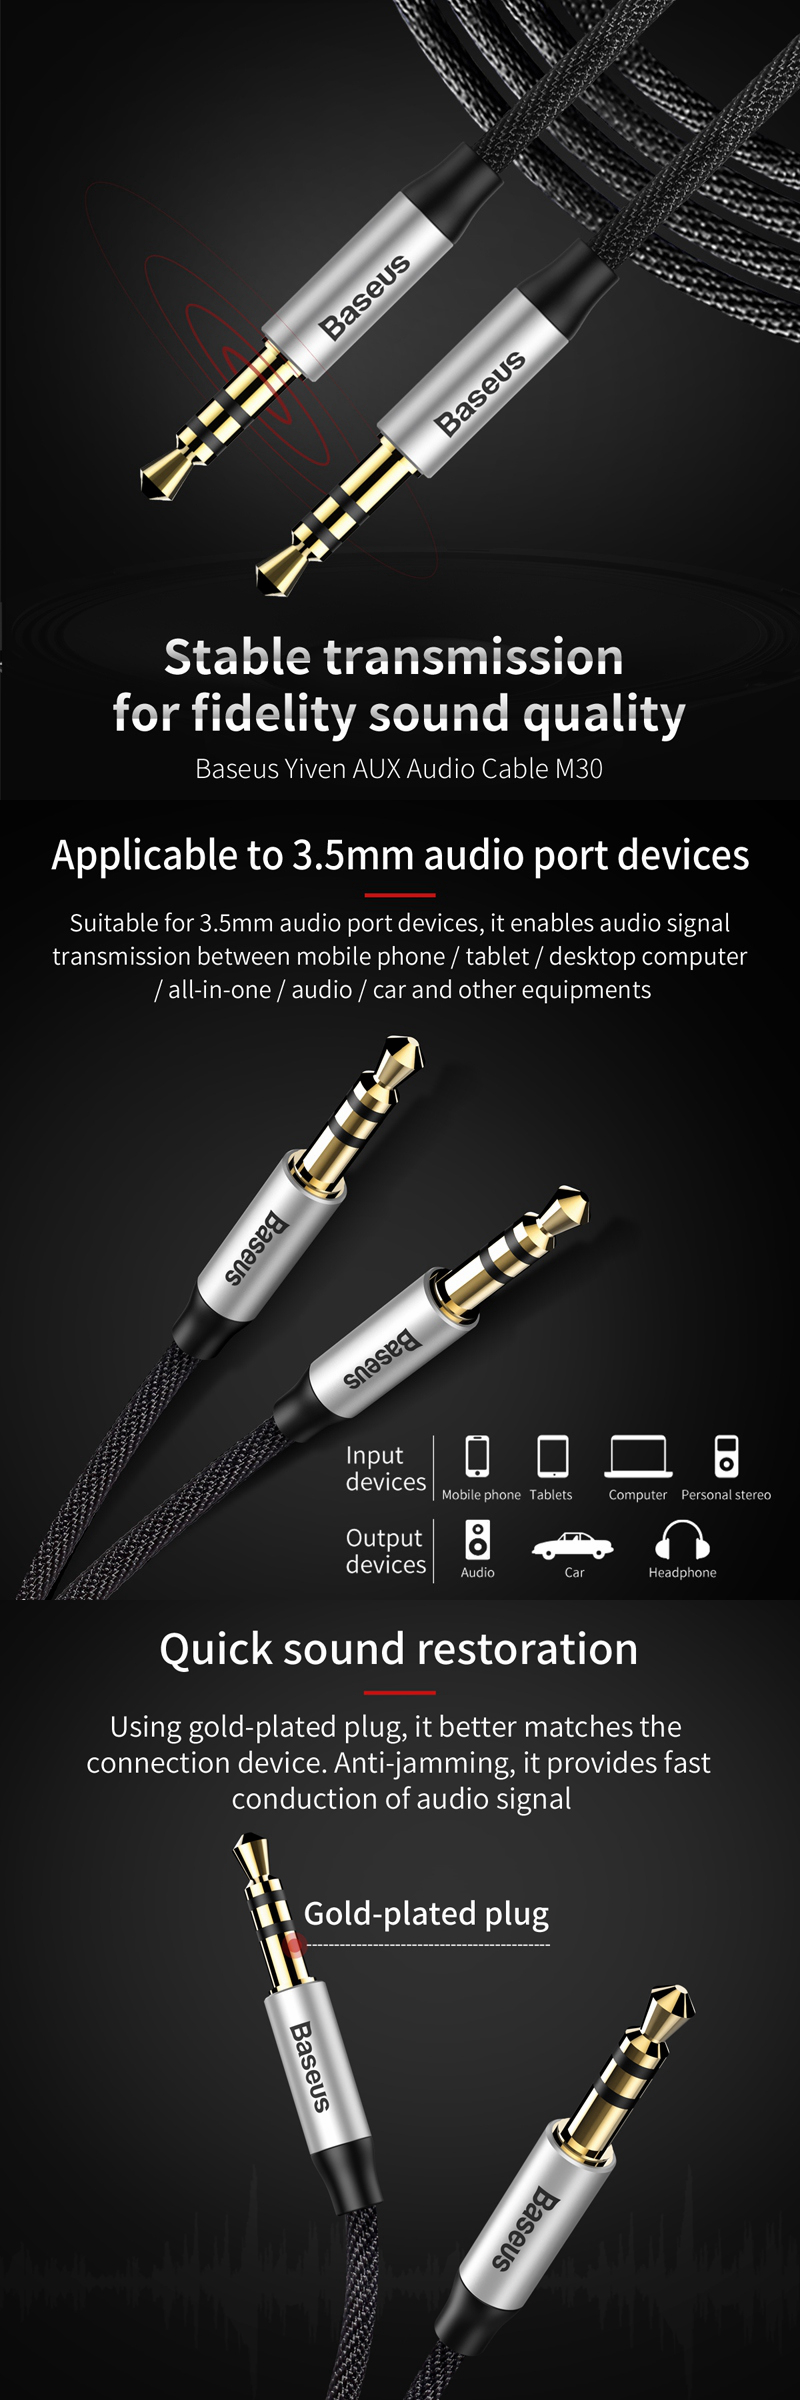 Baseus M30 Yiven Jack 3.5mm Male to Male Audio Cable Adapter for iPhone 7 Samsung Car Tablet PC